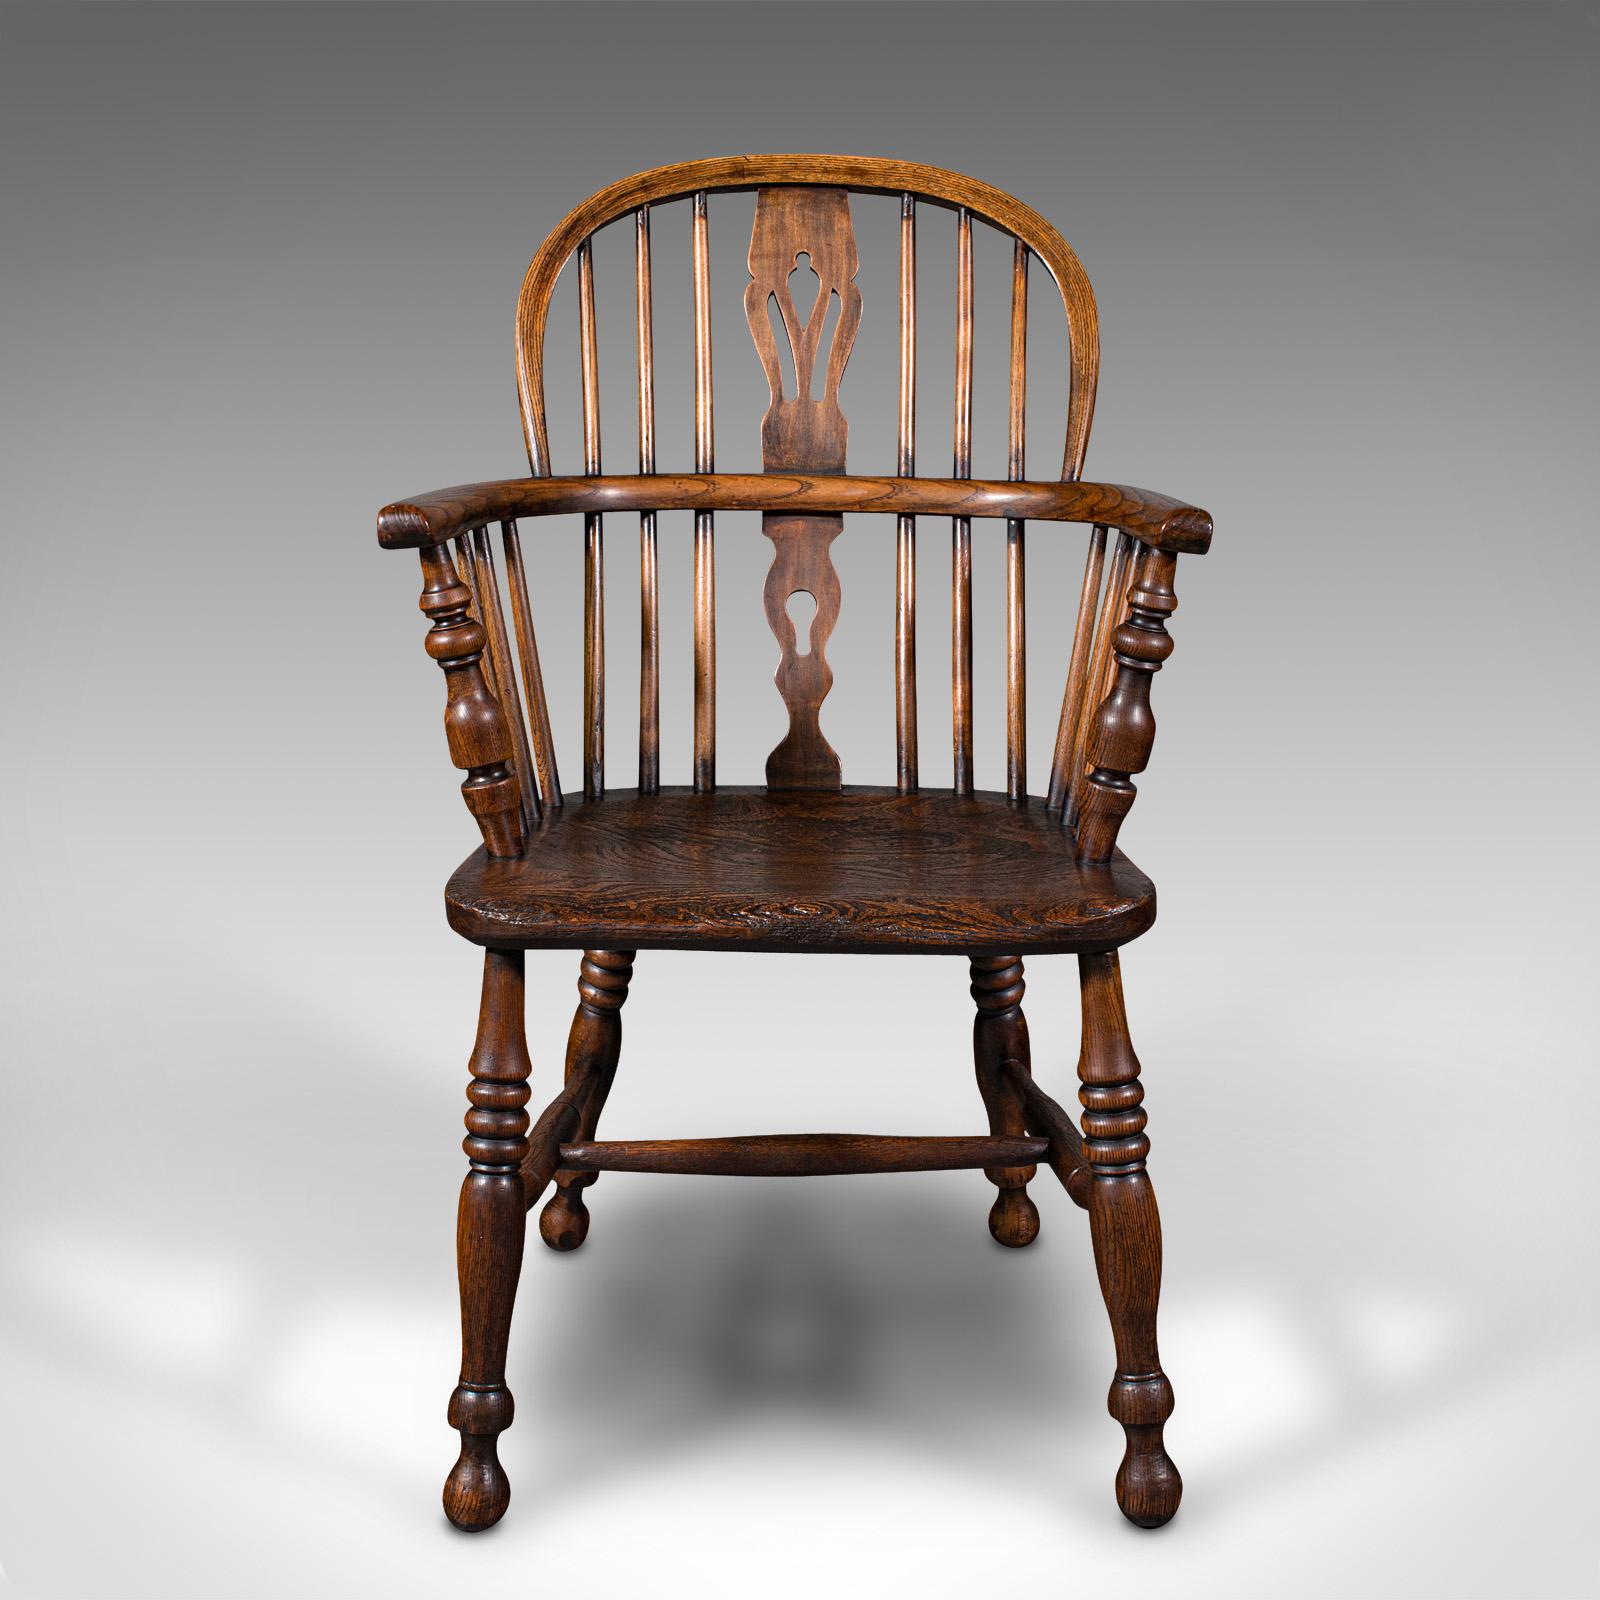 British Pair of Antique Windsor Chairs, English, Elm, Ash, Elbow, Armchair, Victorian